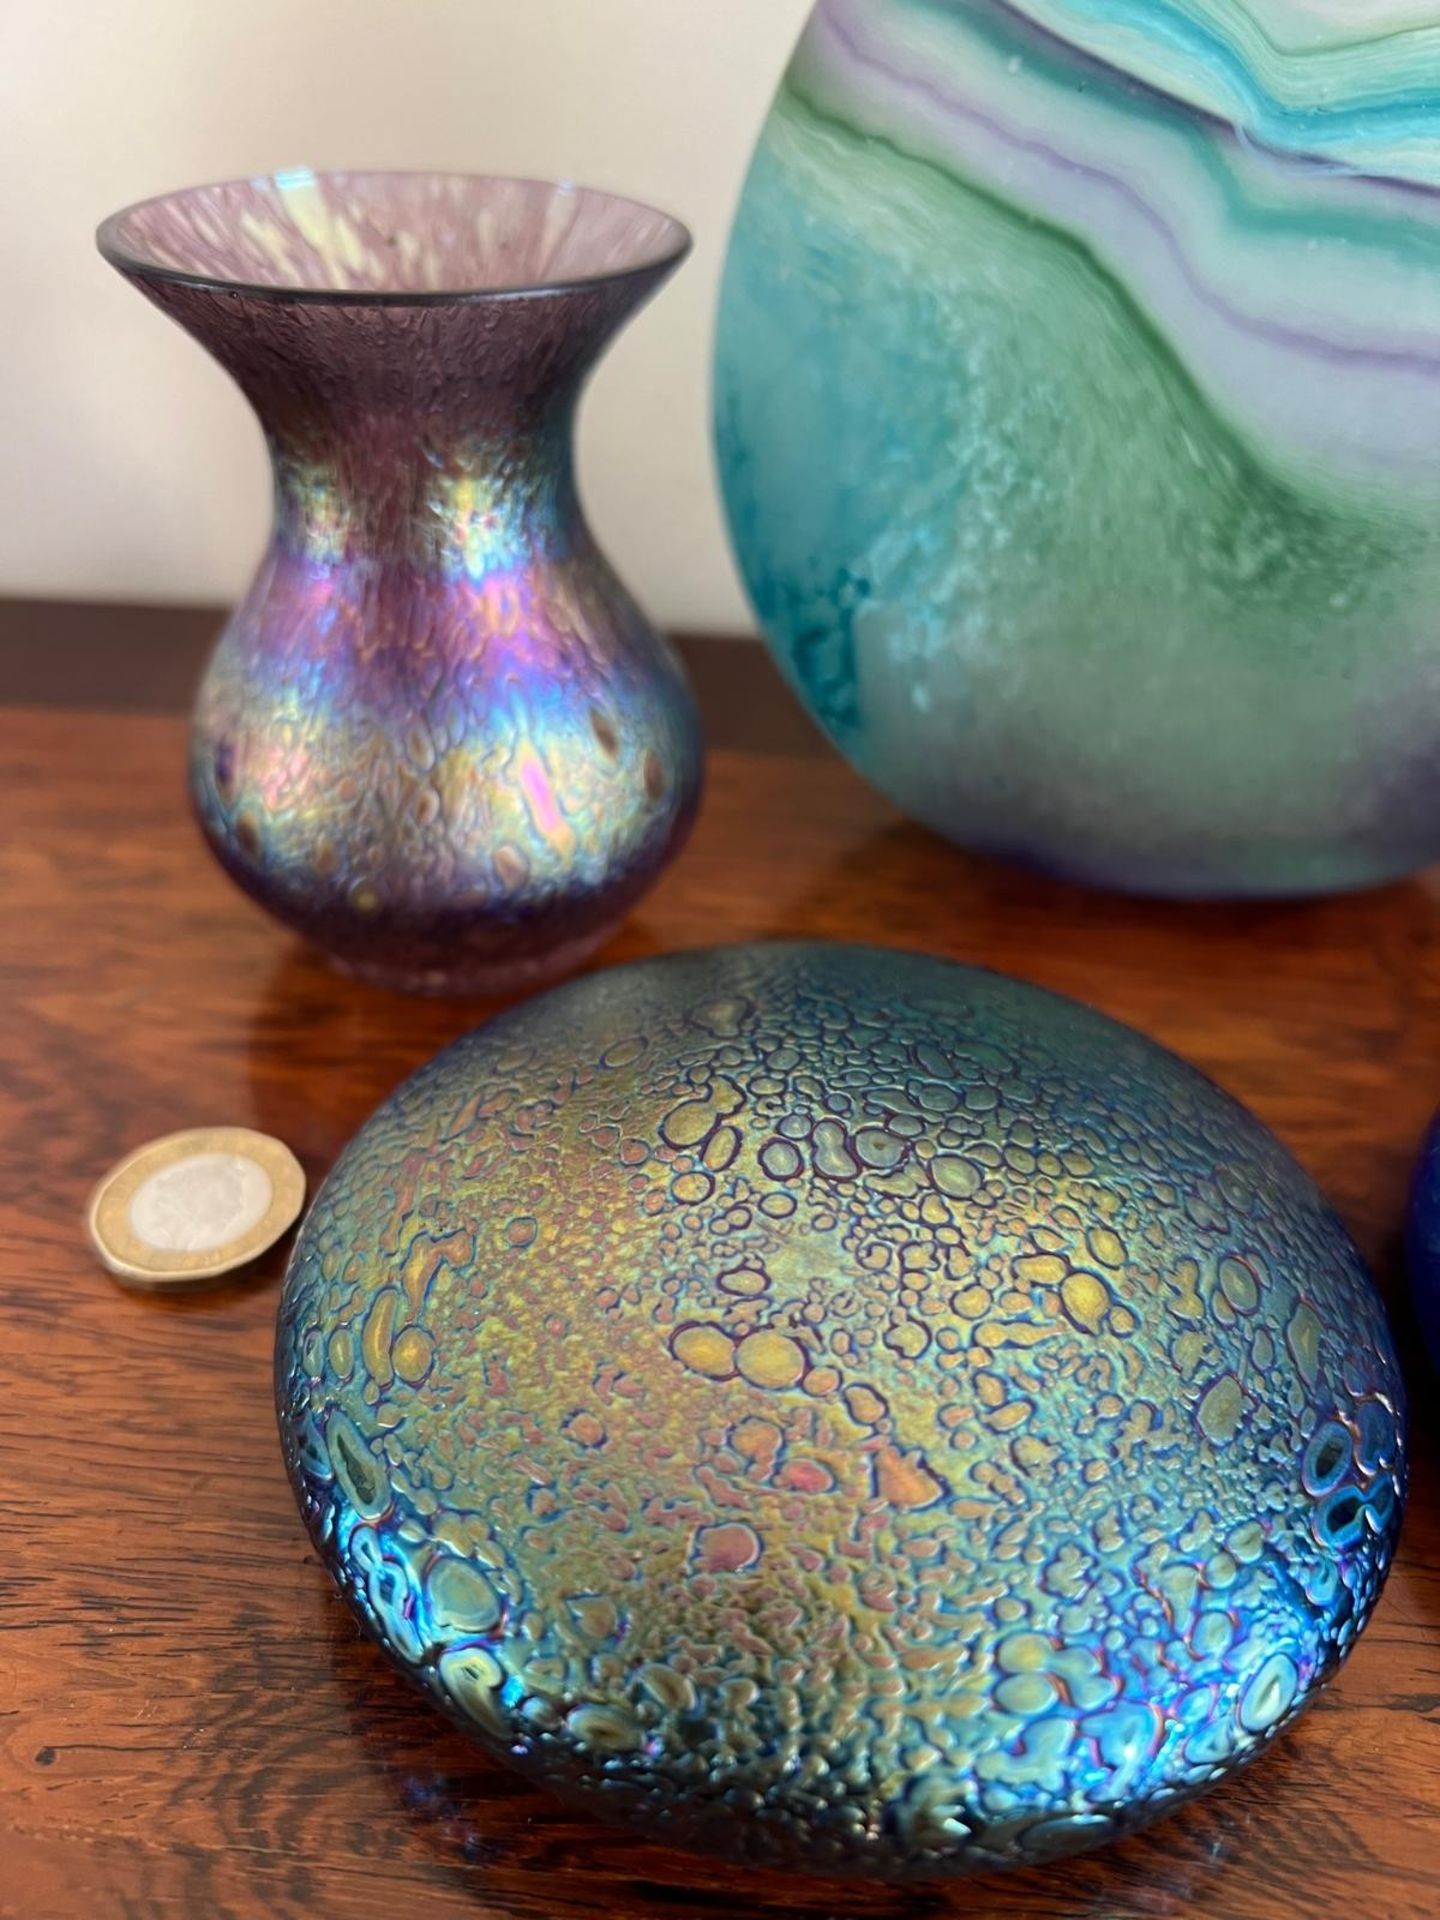 FOUR PIECES OF IRIDESCENT DECORATIVE ART GLASS AND ALSO HAND BLOWN GLASS VASE - Image 2 of 3